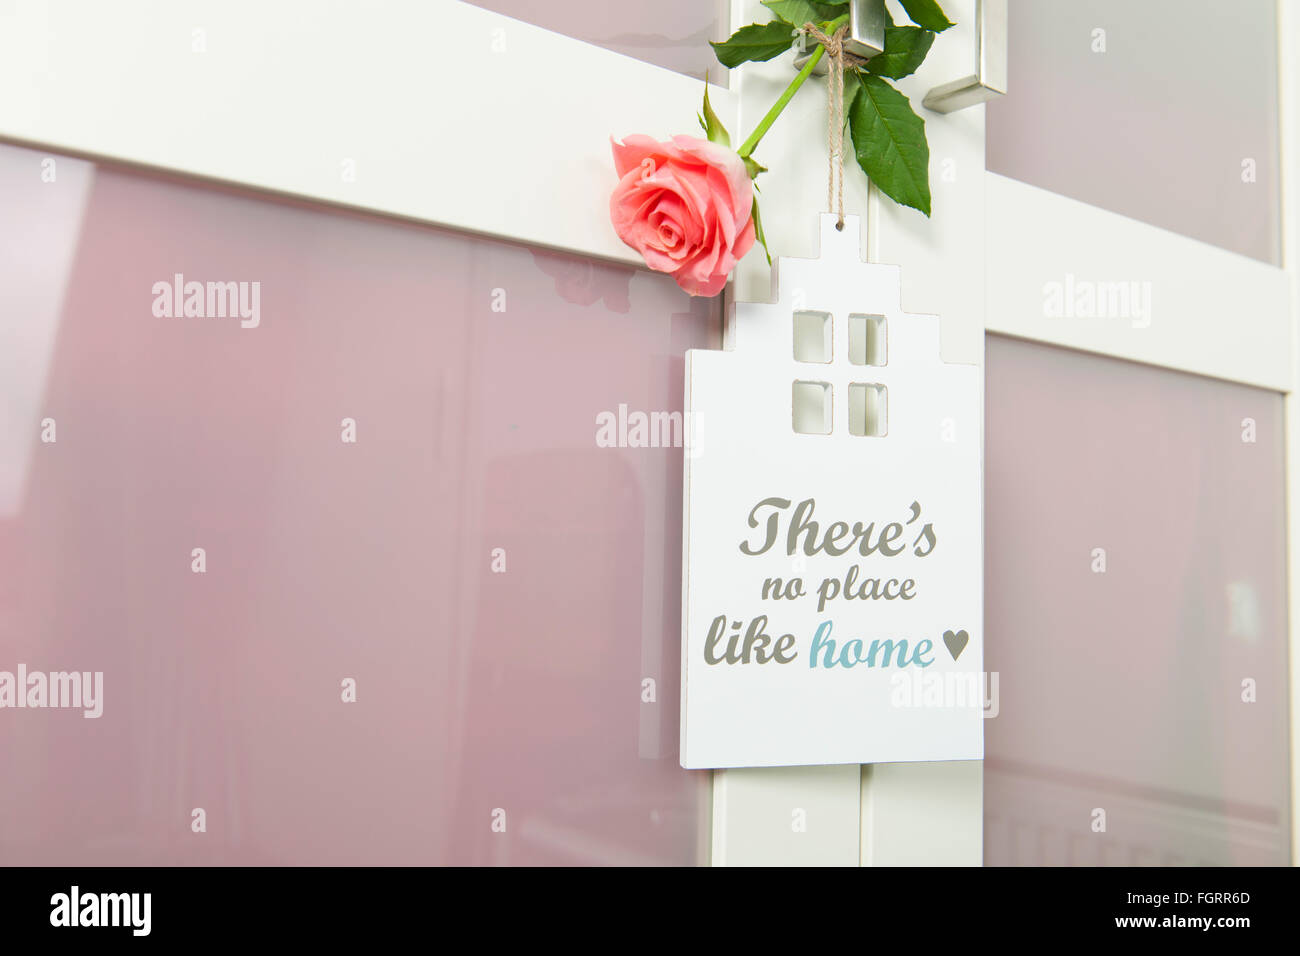 door hanger with no place like home with rose Stock Photo